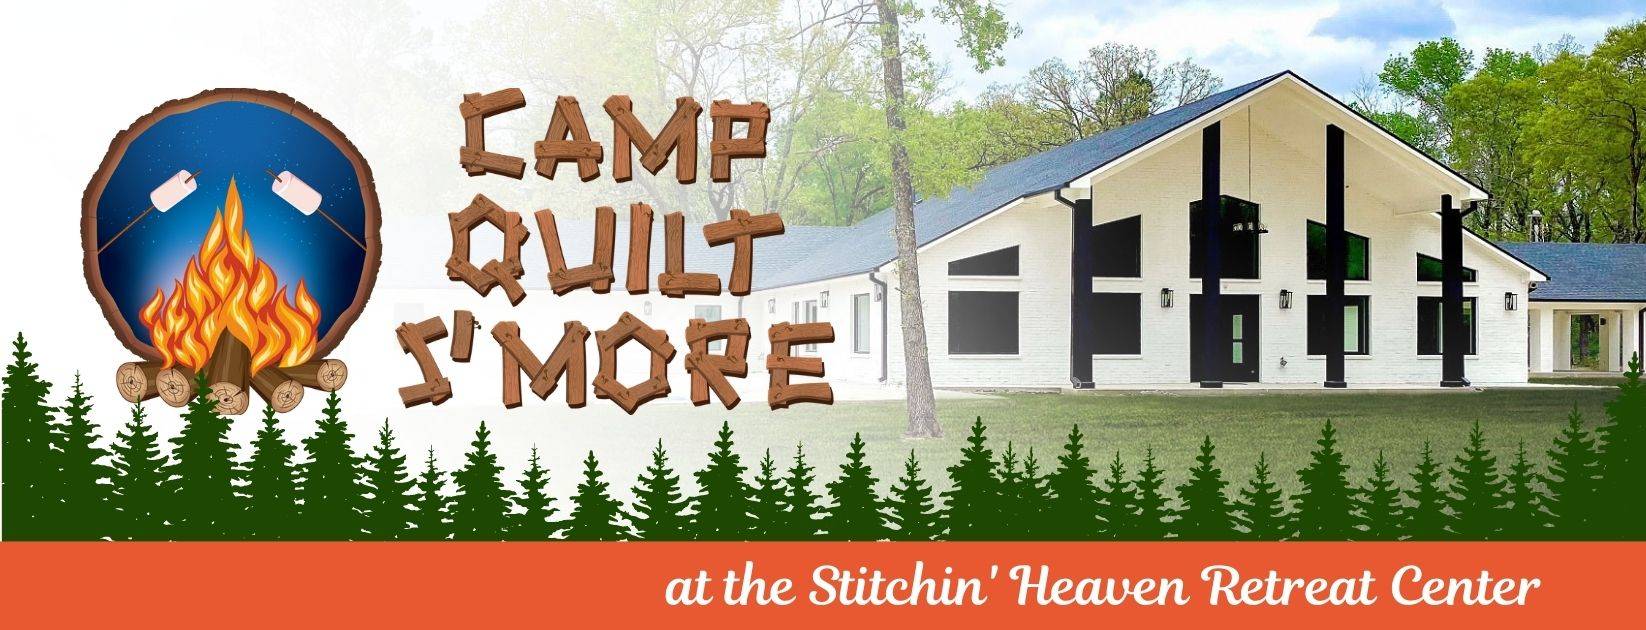 Camp Quilt S'more